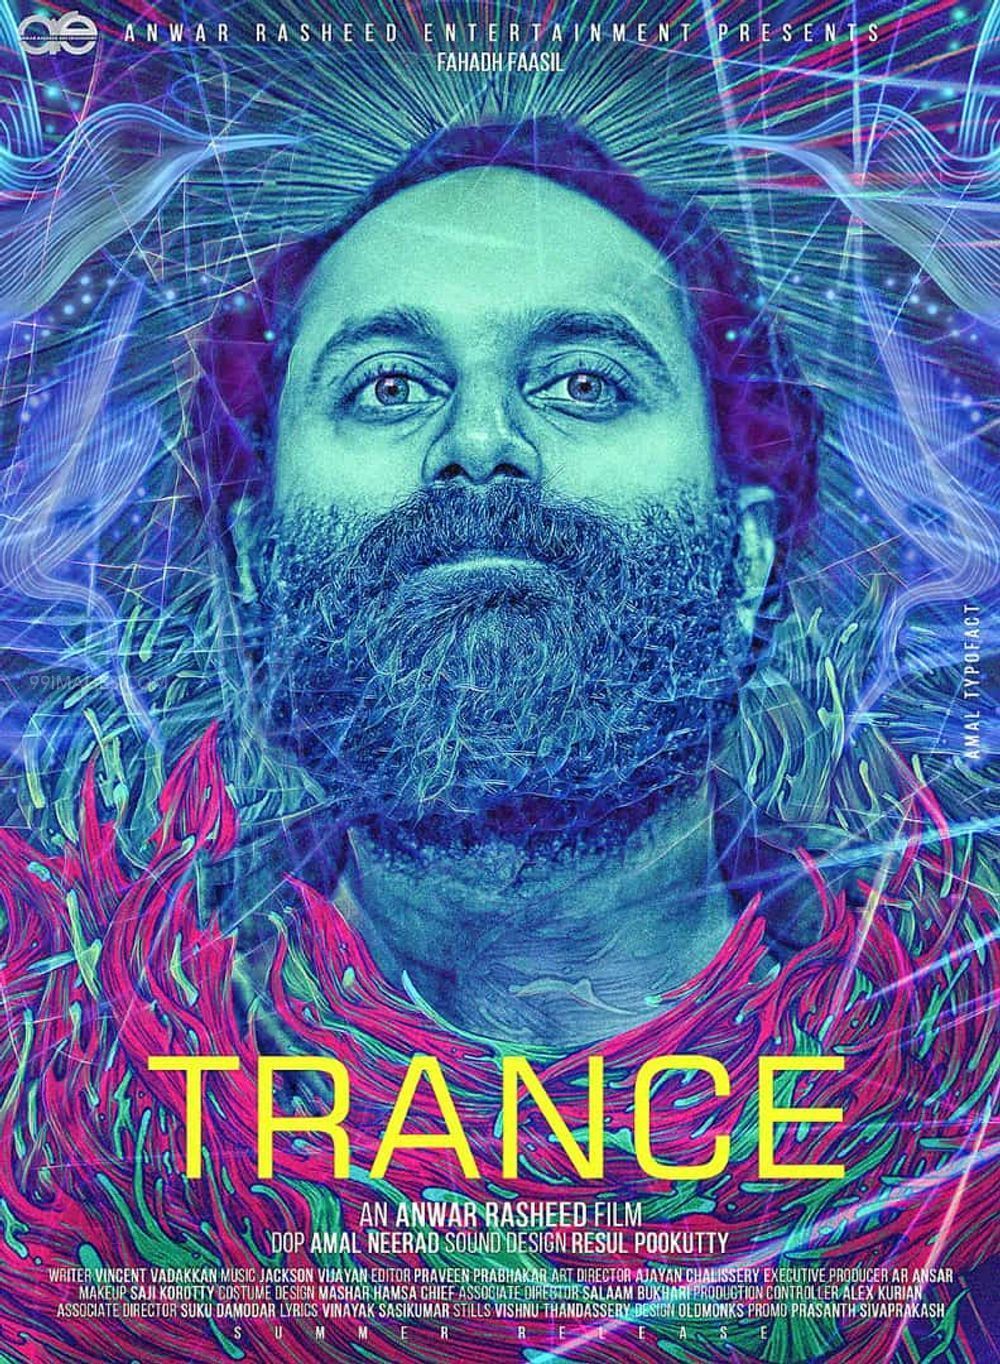 Trance Image, HD Photo (1080p), Wallpaper (Android IPhone) (2020)